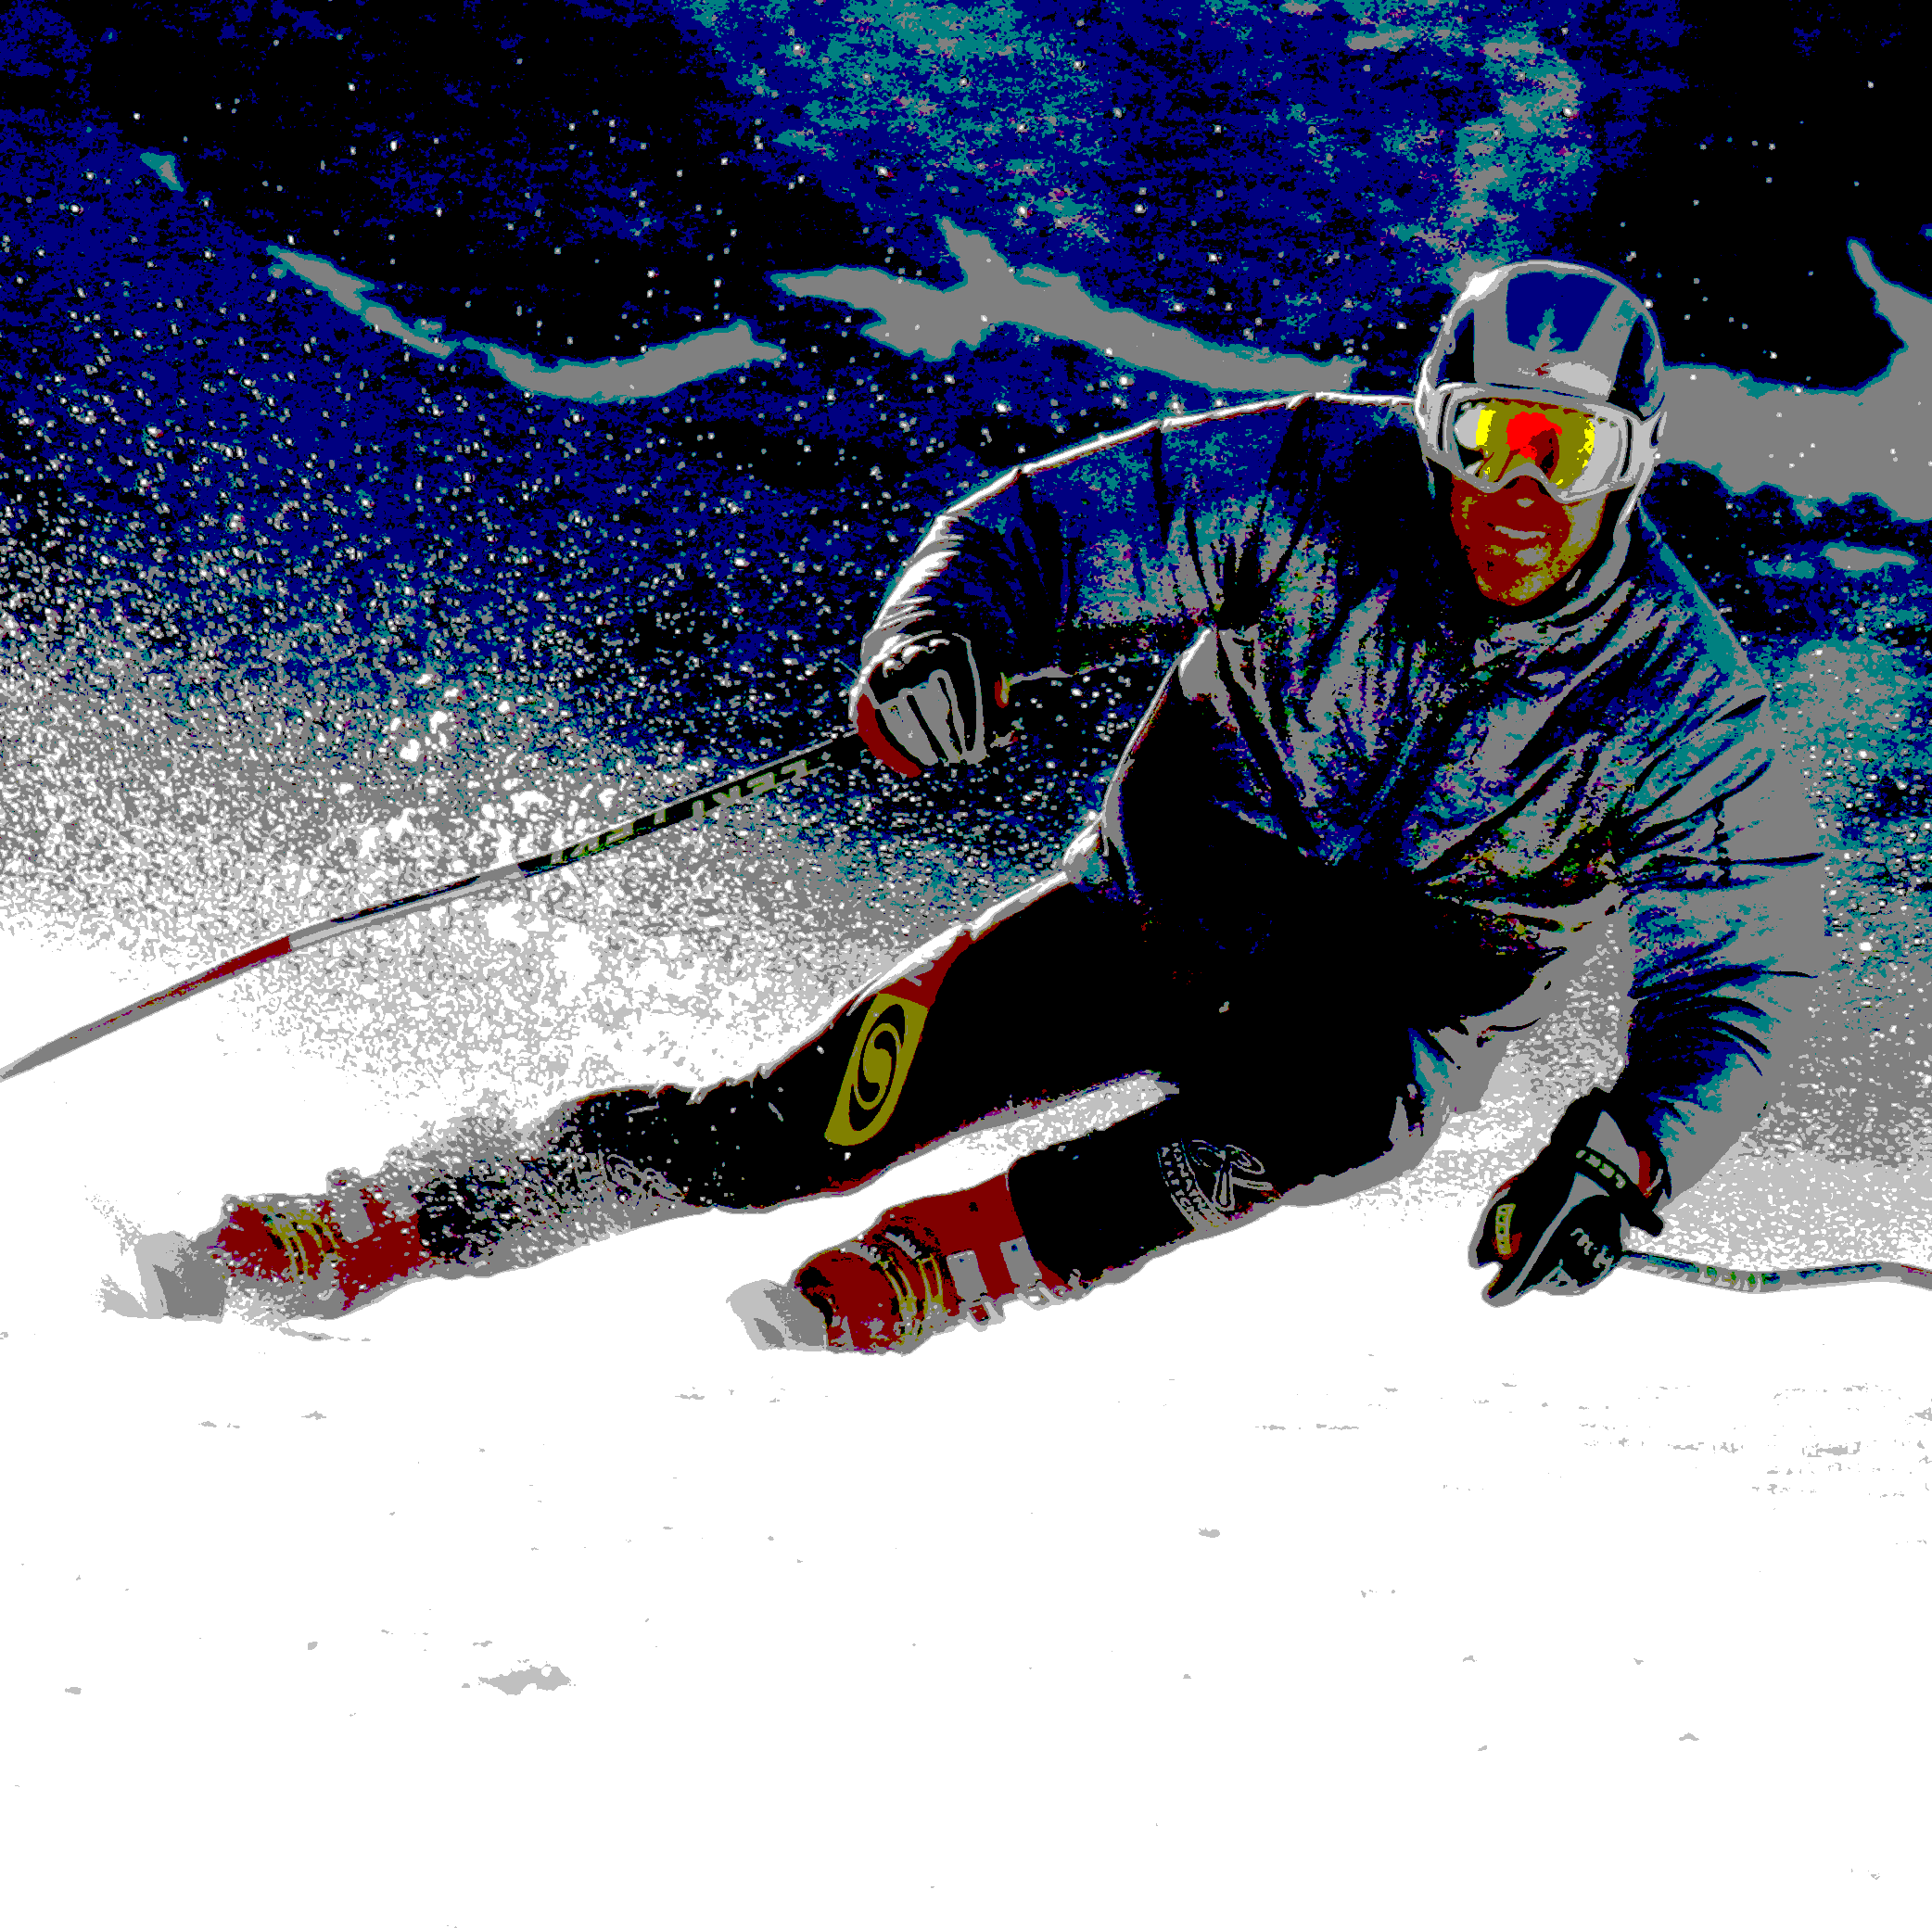 Skiing Fast with a great mindset